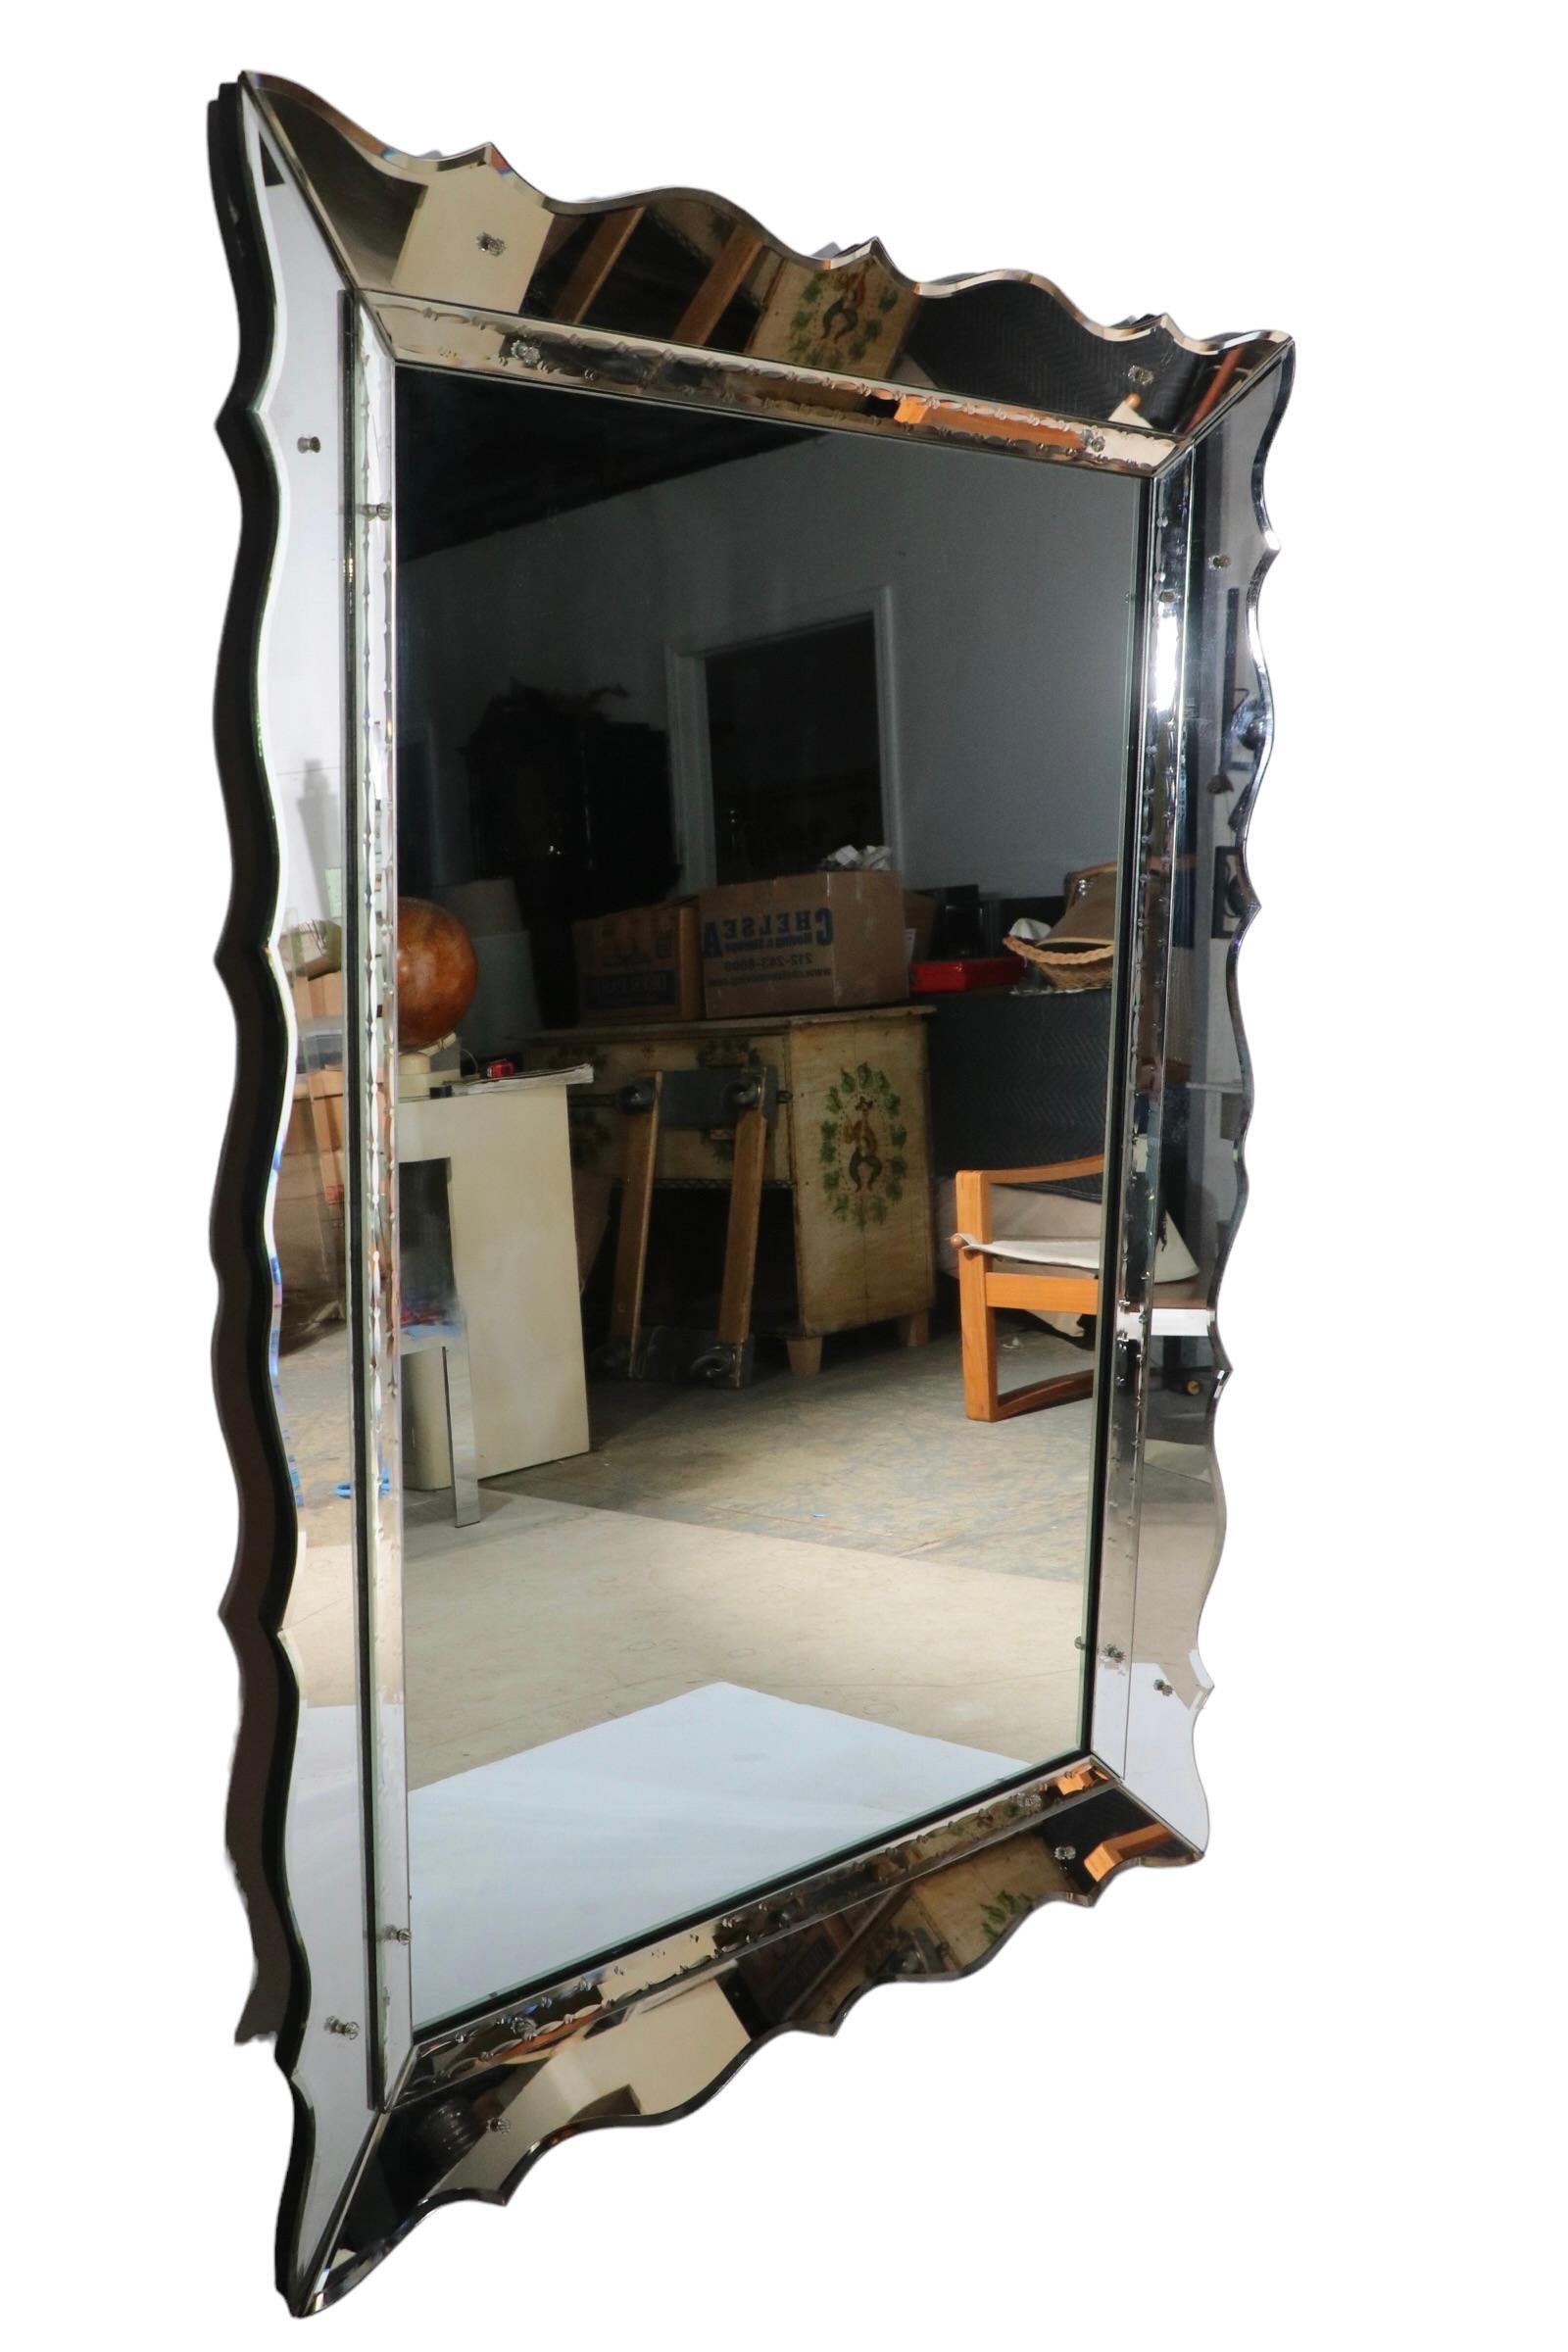 Glamorous High Style Art Deco, Hollywood Regency, Venetian style mirror in the manner of Marchand. This example features scalloped mirrored edging, and mirror trim which surrounds the rectangular interior mirror panel. The piece is in very fine,